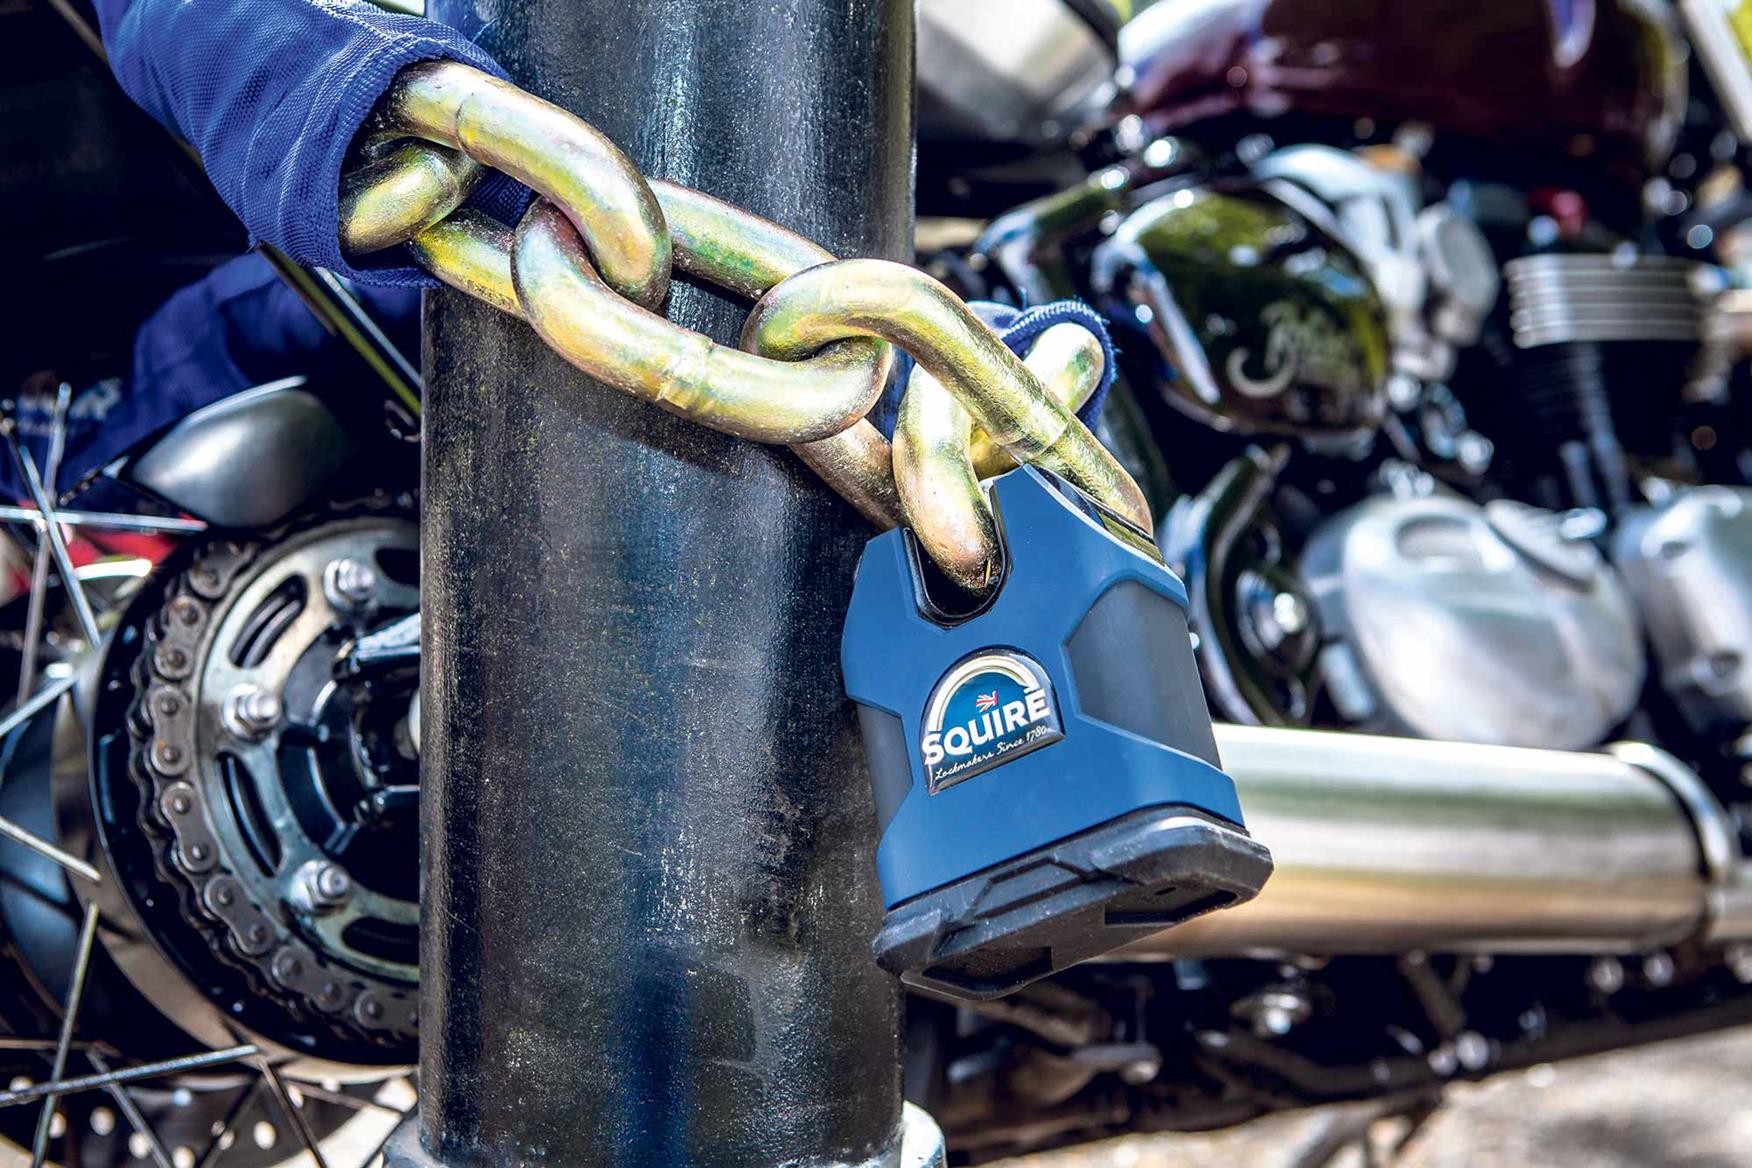 New breed of locks and chains is latest weapon against theft | MCN